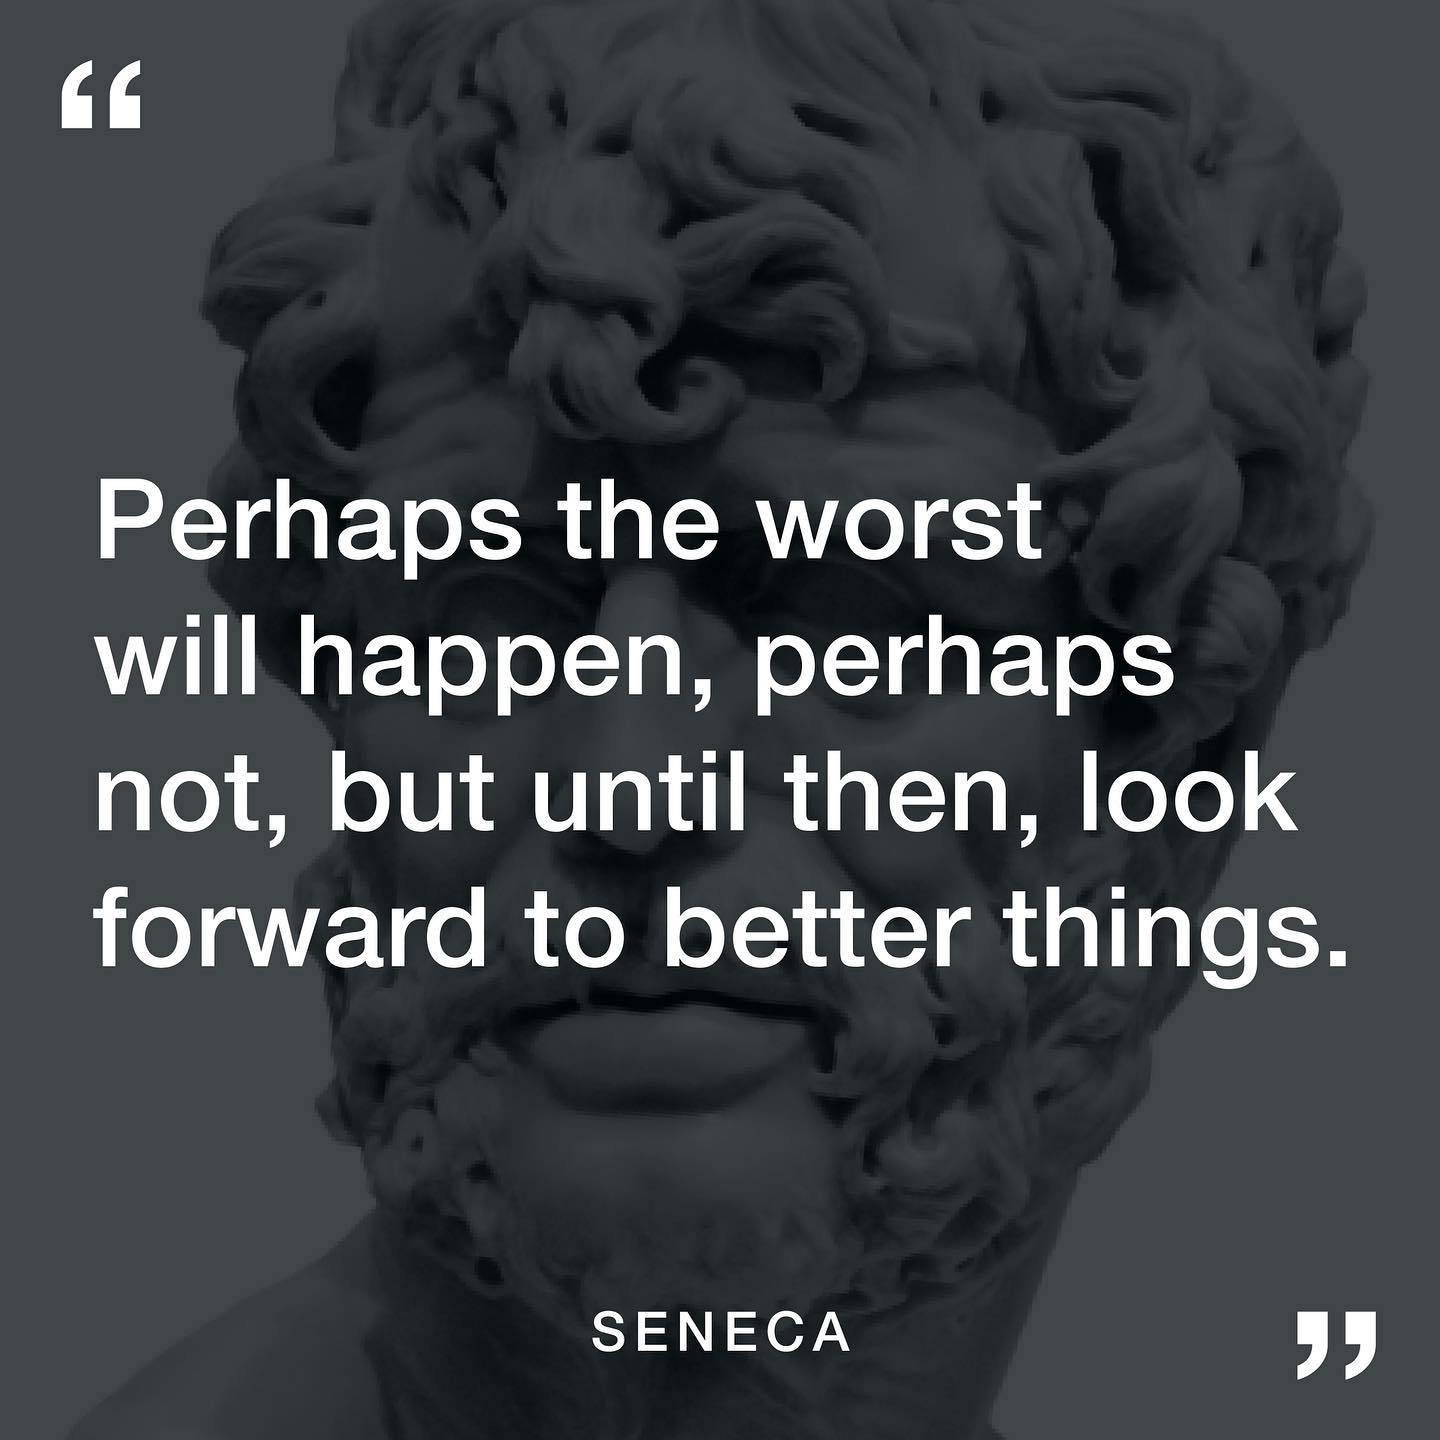 Perhaps the worst will happen, perhaps not, until then, look forward to better things.